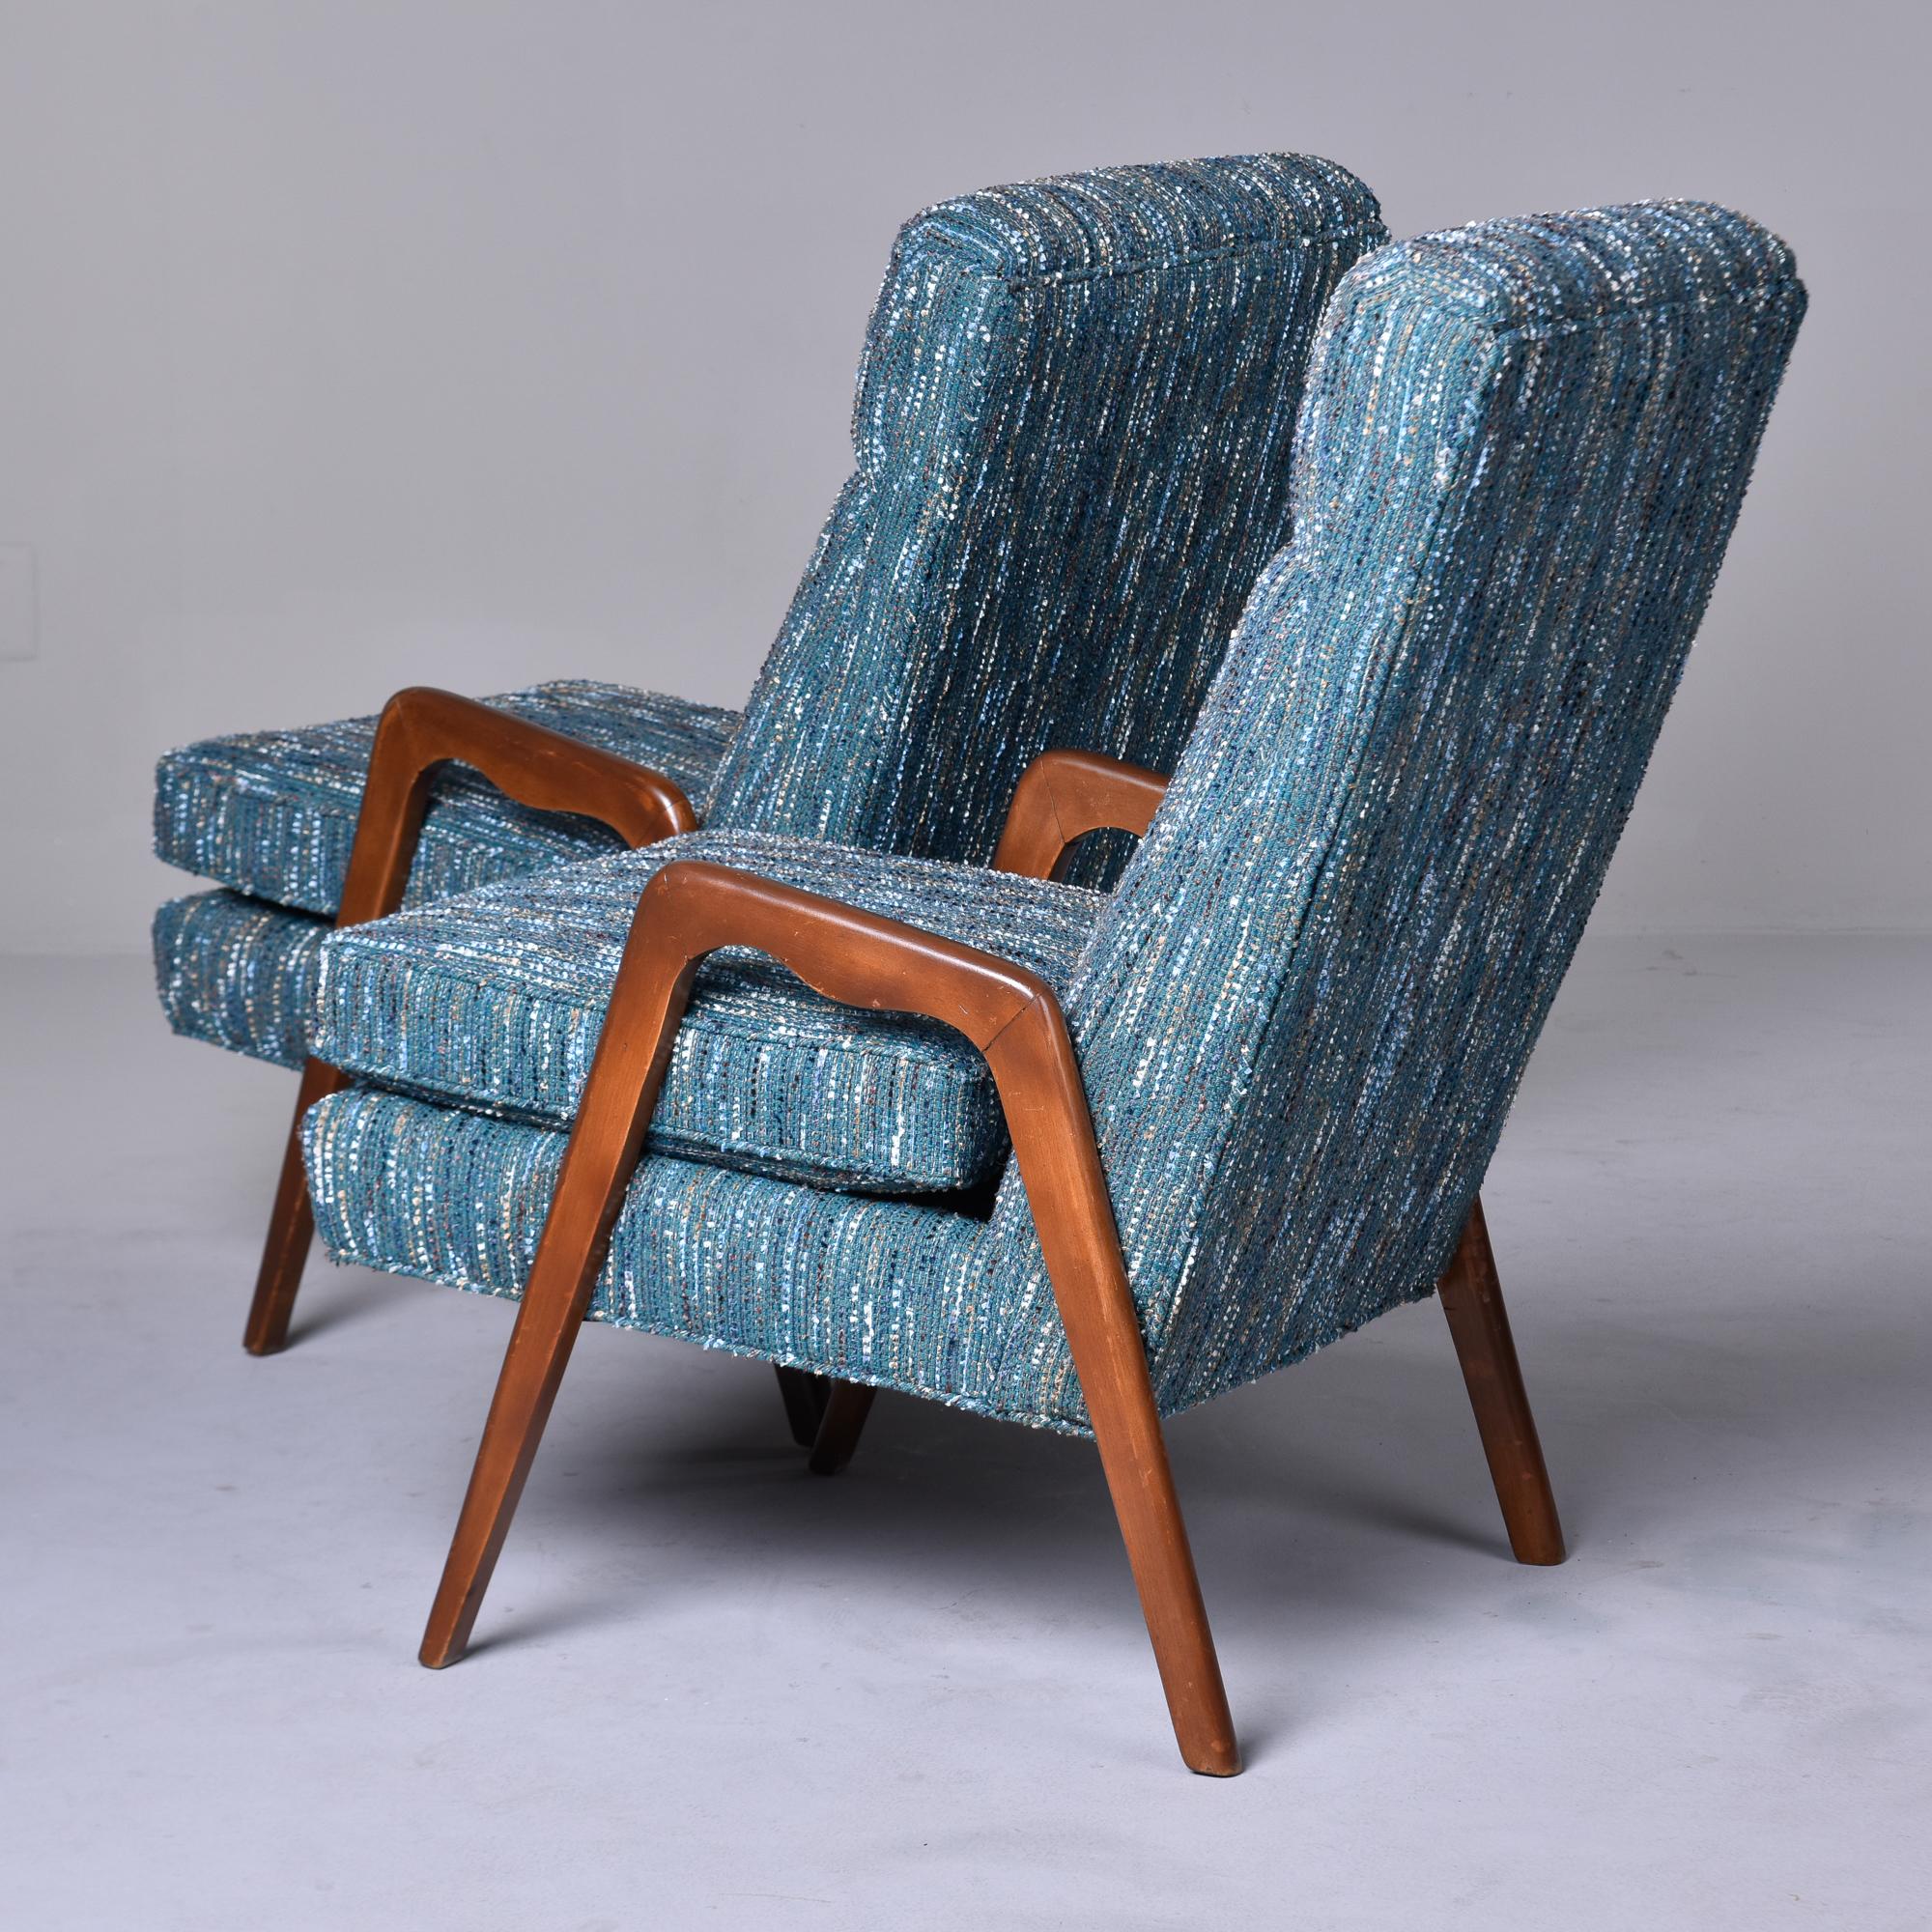 Pair of Mid-Century Italian Chairs with New Teal Tweed Upholstery For Sale 1